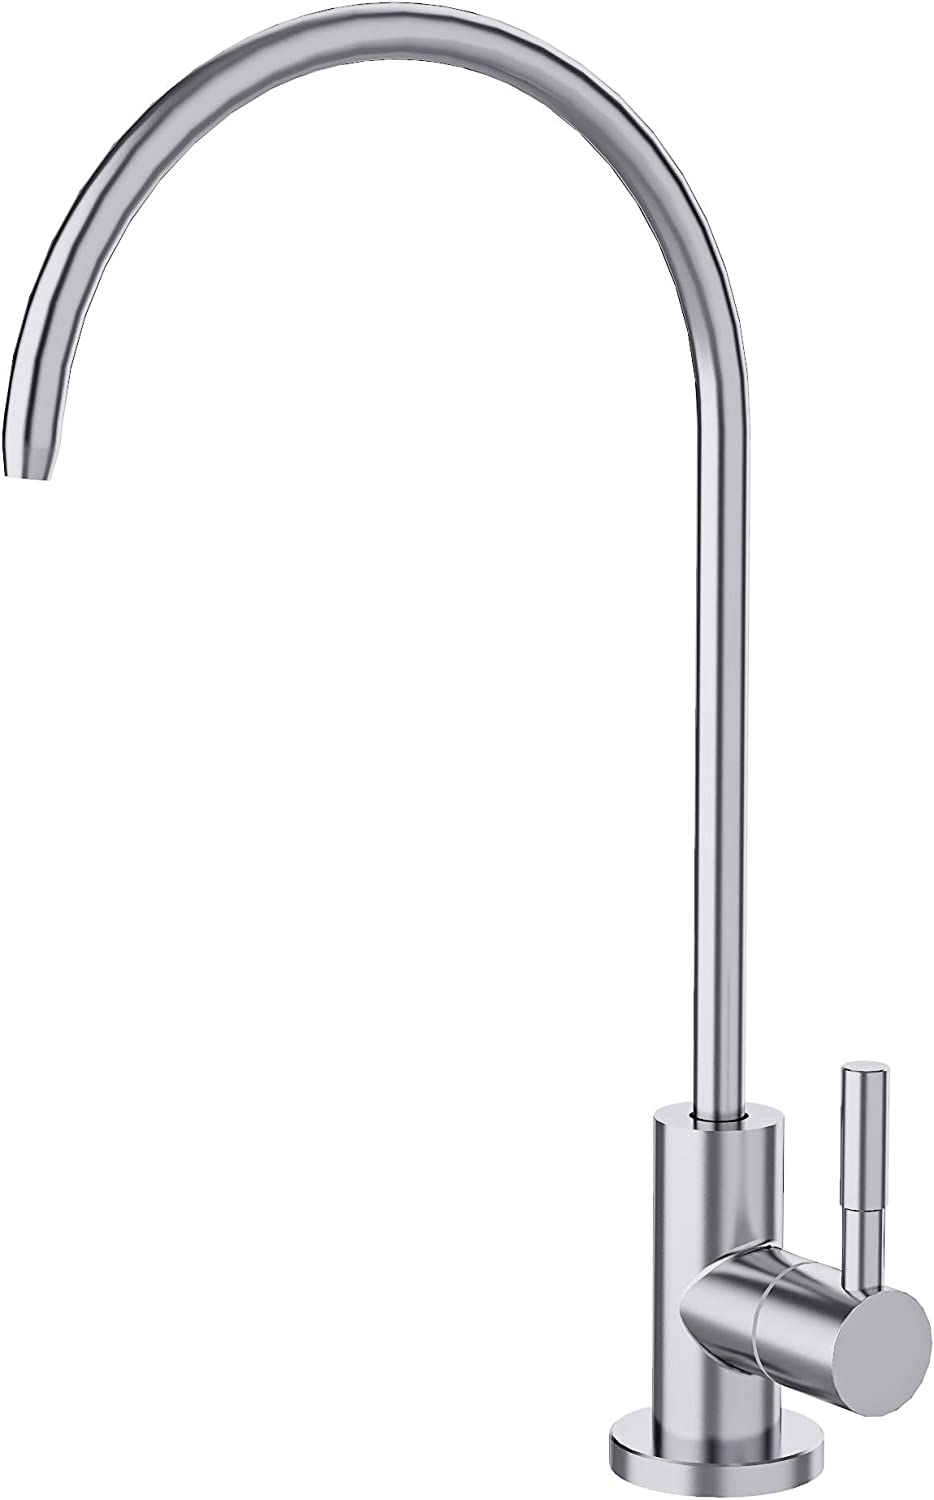 Drinking Water Filter Faucet, Mensarjor Purifier Faucet Leak-Free, SUS304 Stainless Steel, 360-Degree Swivel Spout, Utility Kitchen Sinks Reverse Osmosis Filtered Water Pull Out Faucets